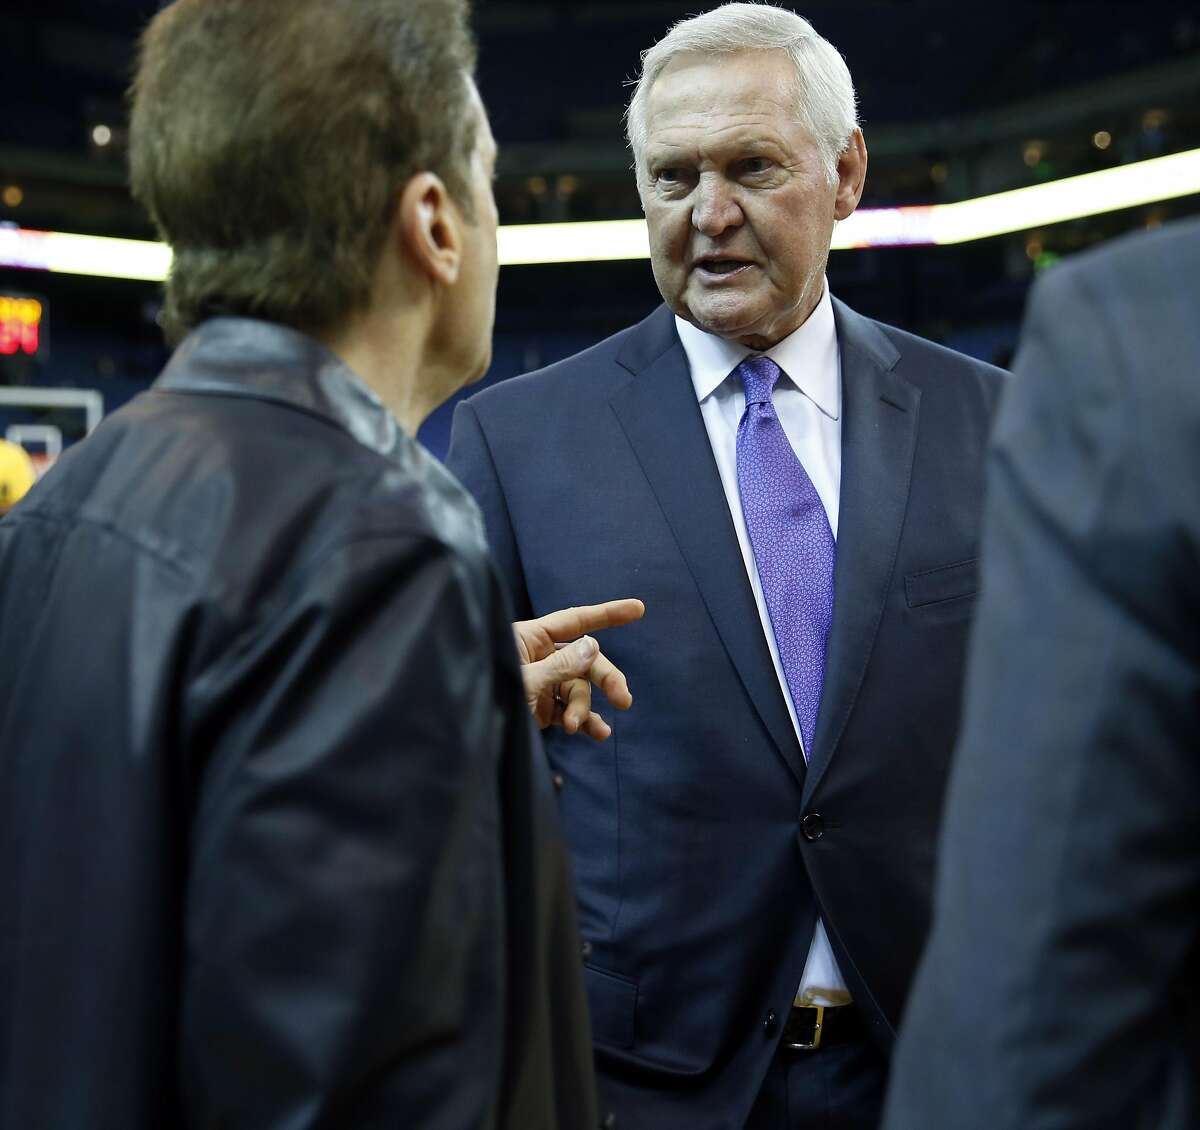 Jerry West Hates His “False and Defamatory Portrayal” in Winning